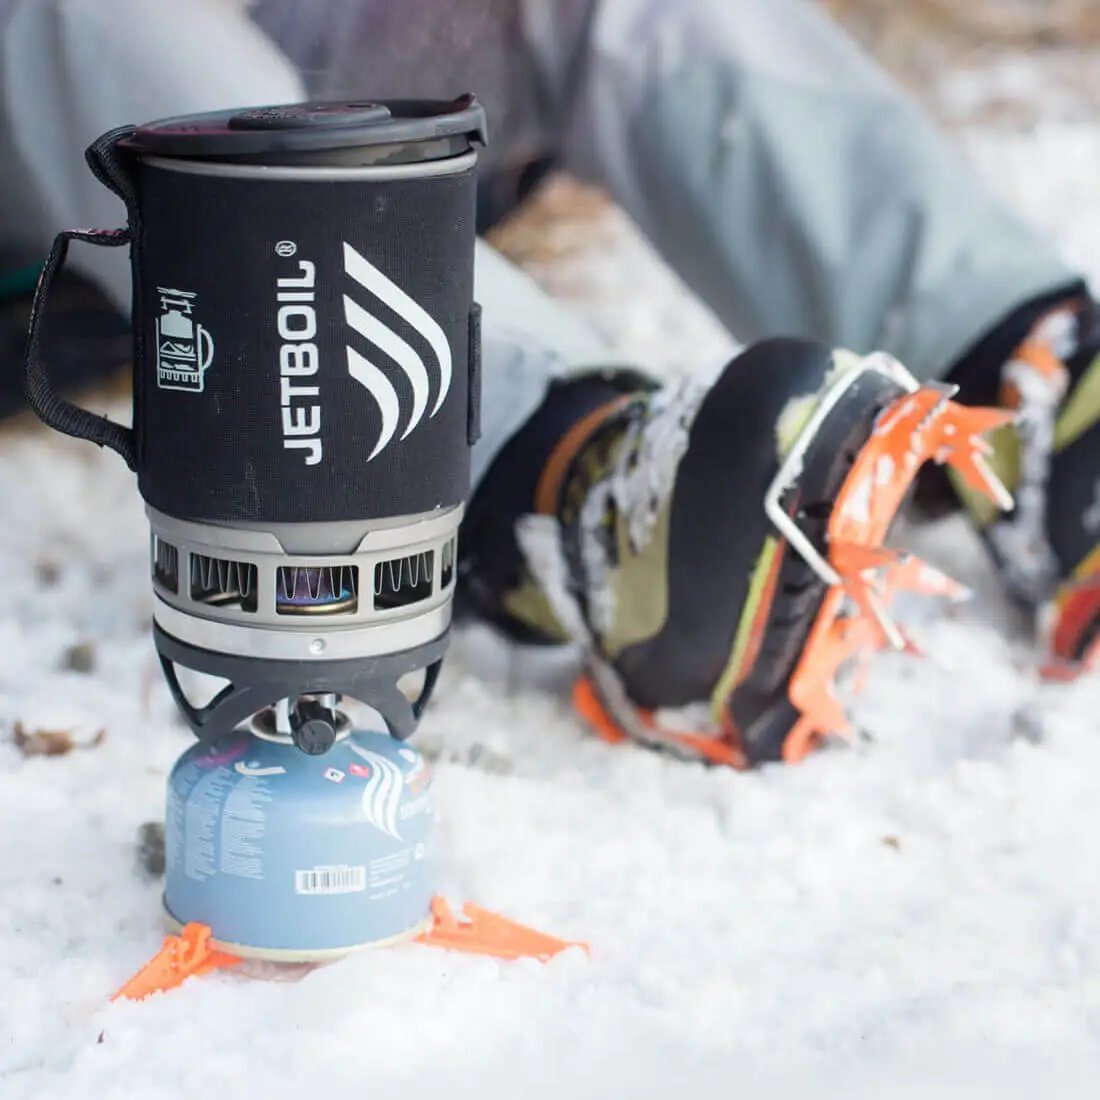 Jetboil Zip Carbon Fast Boil Cooking System Stove - John Bull Clothing